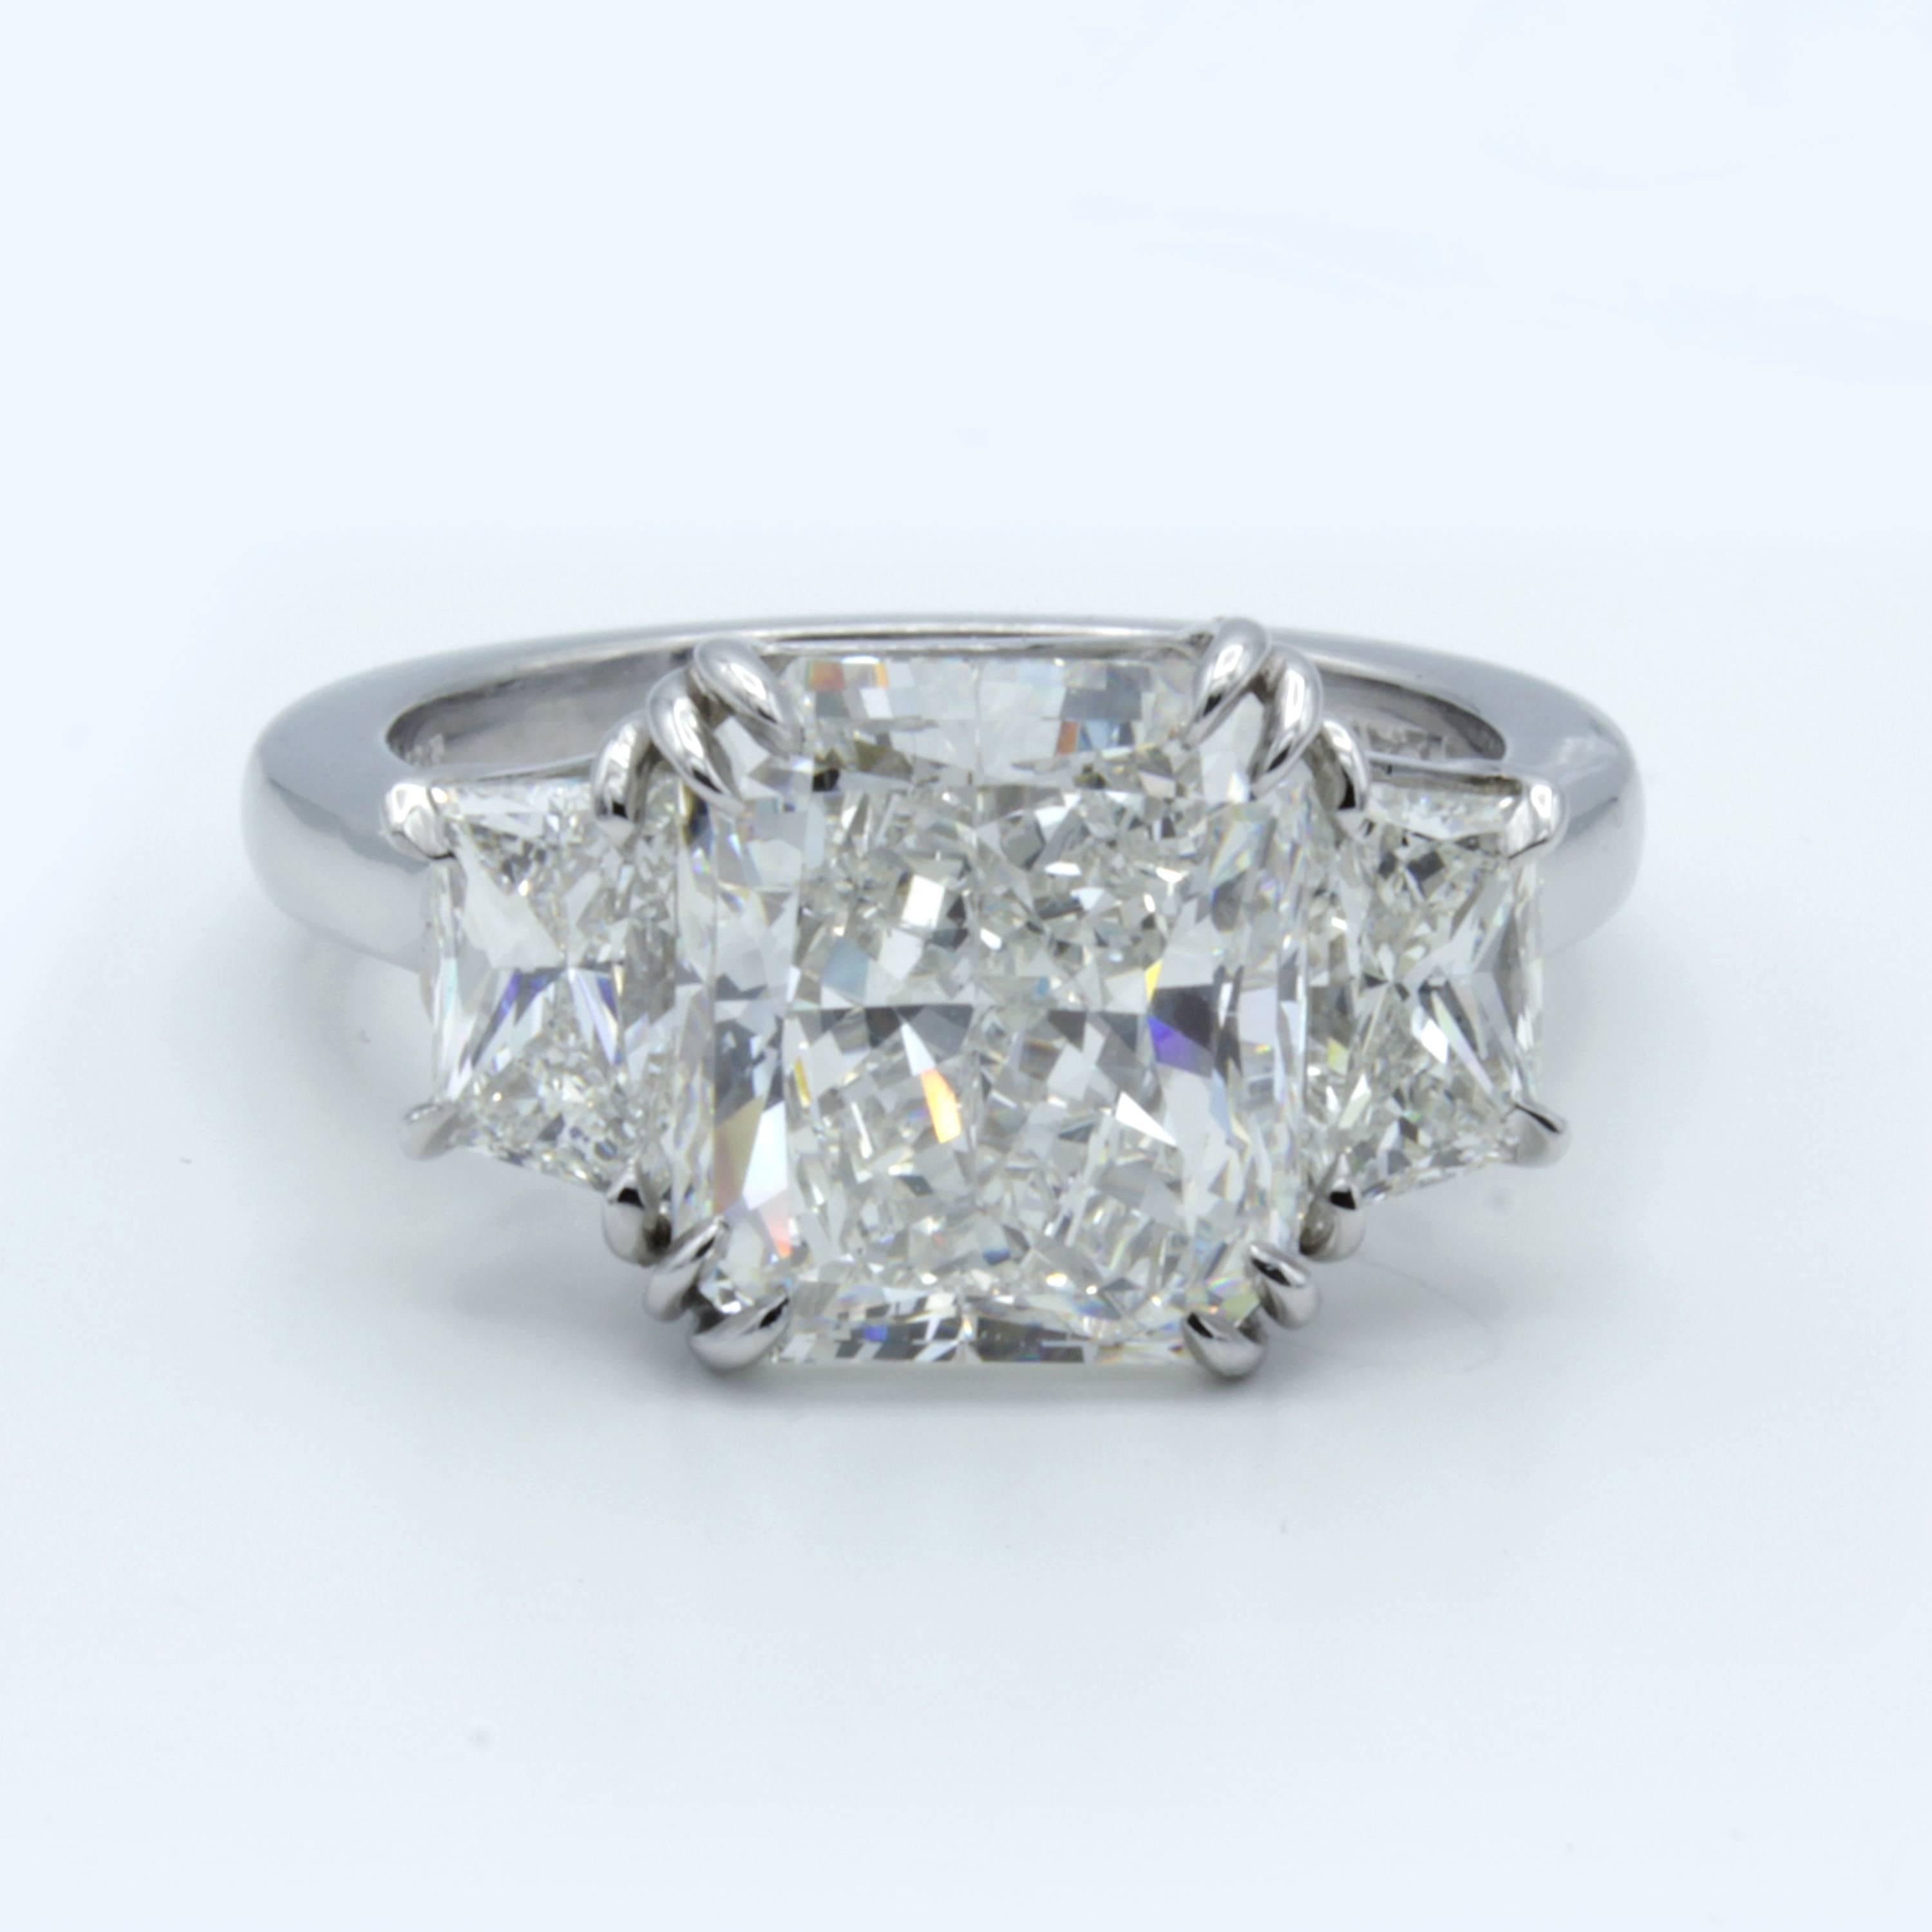 This Rosenberg Diamonds & Co. engagement ring shows an incredible 4.34 carat radiant cut diamond within a band of bright platinum. At each side shine beautiful trapezoid diamond side stones highlighting the beautiful center stone perfectly.
 
